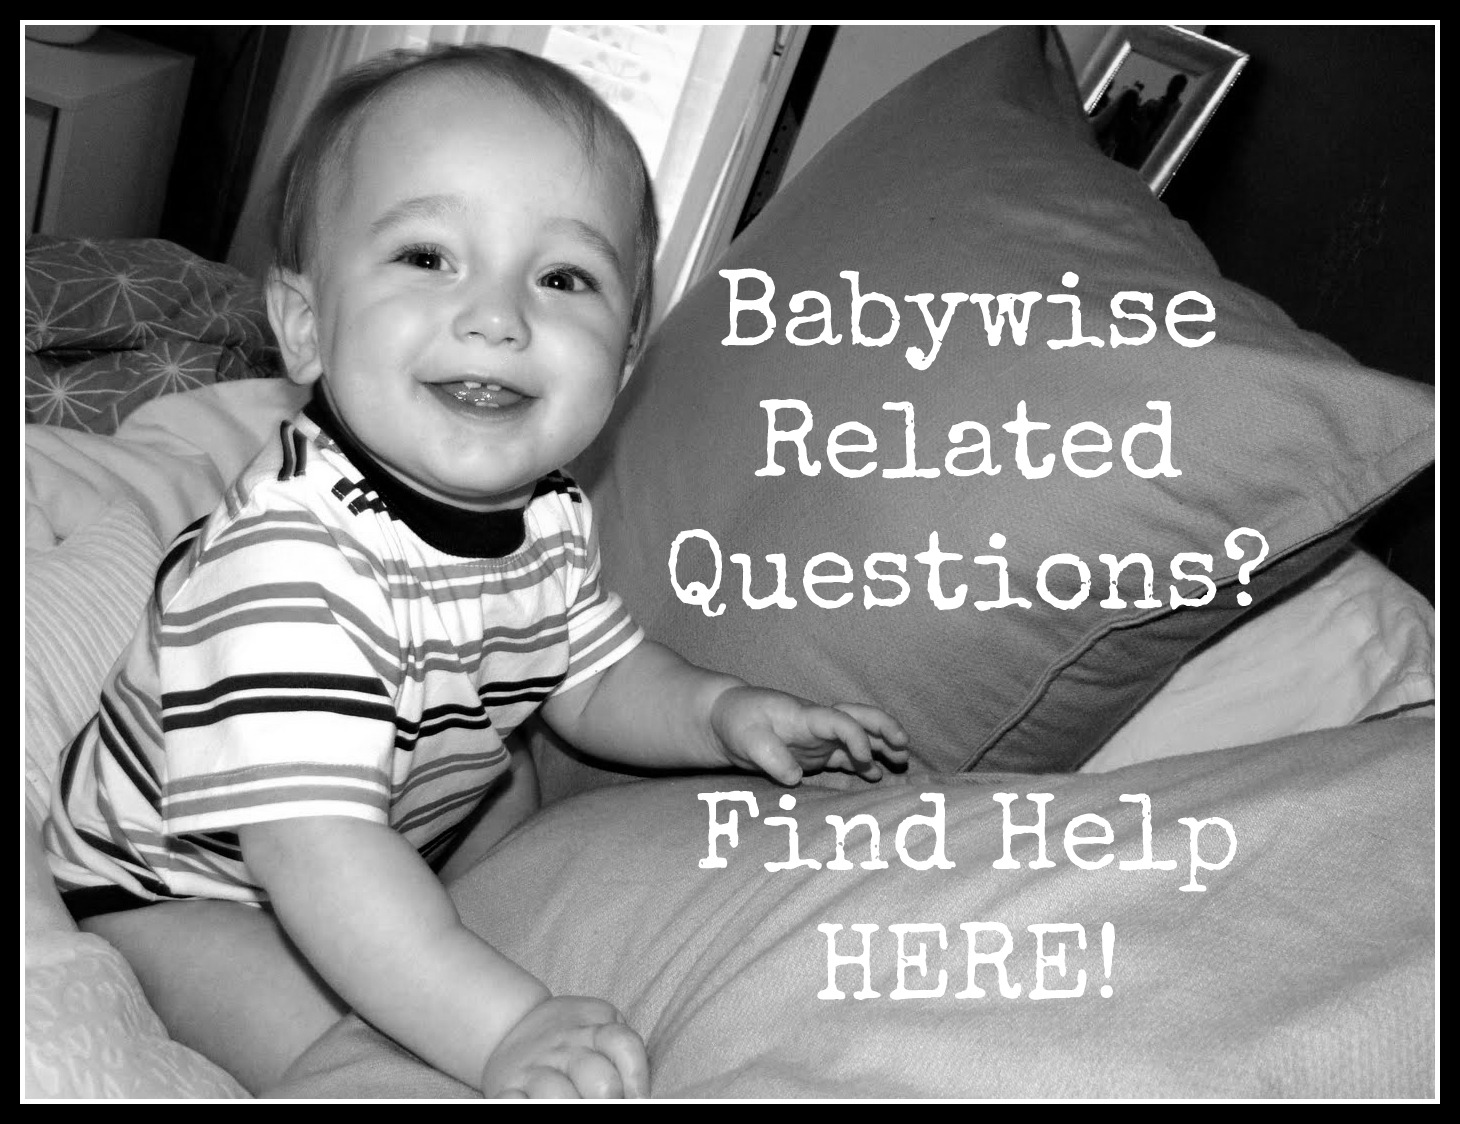 Babywise Support: Where to find Help!